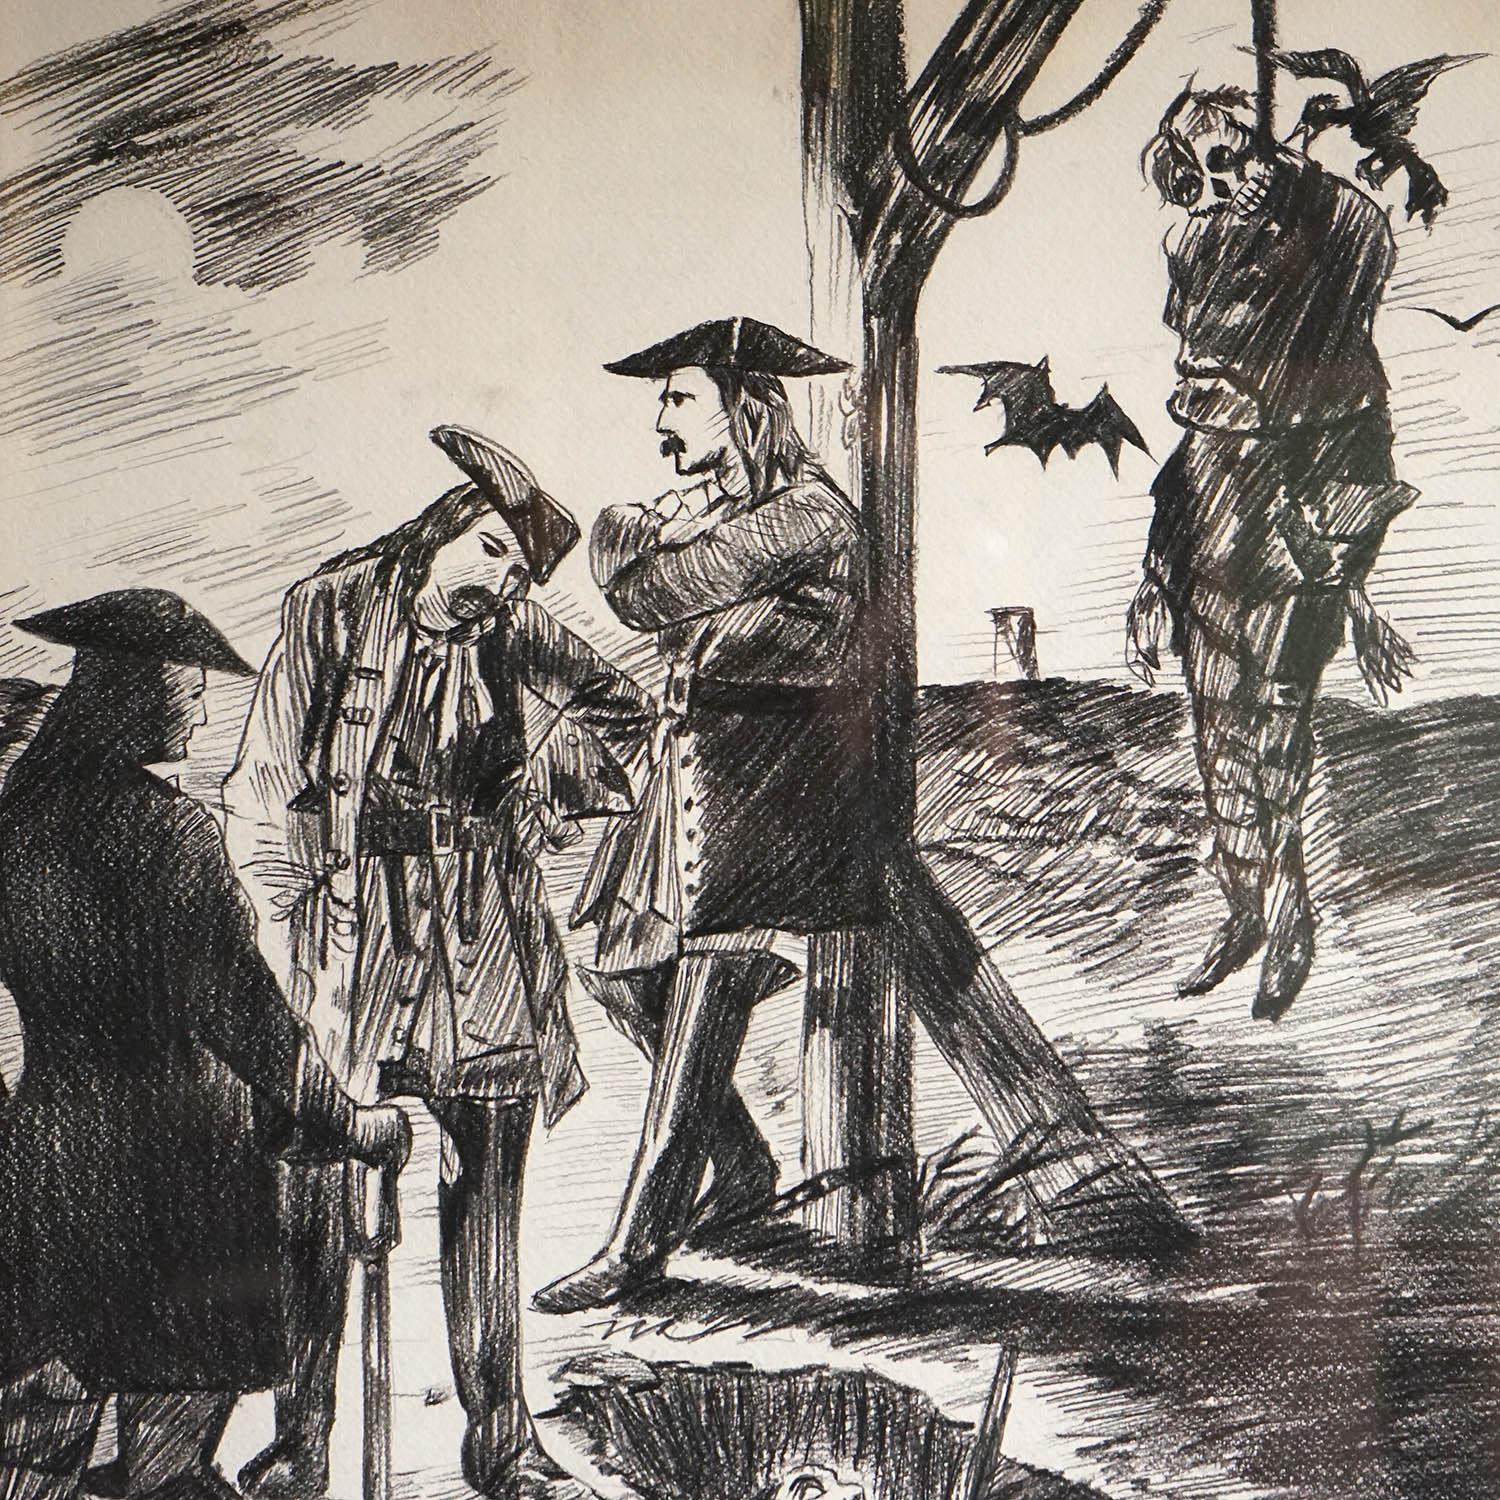 Vintage Original Pencil and Charcoal Study

Depicting a rather serious situation at the gallows, the victim of the hanging appears to have been hanging for a while and is being picked apart by crows. Three men in tricorn hats stand in front of the